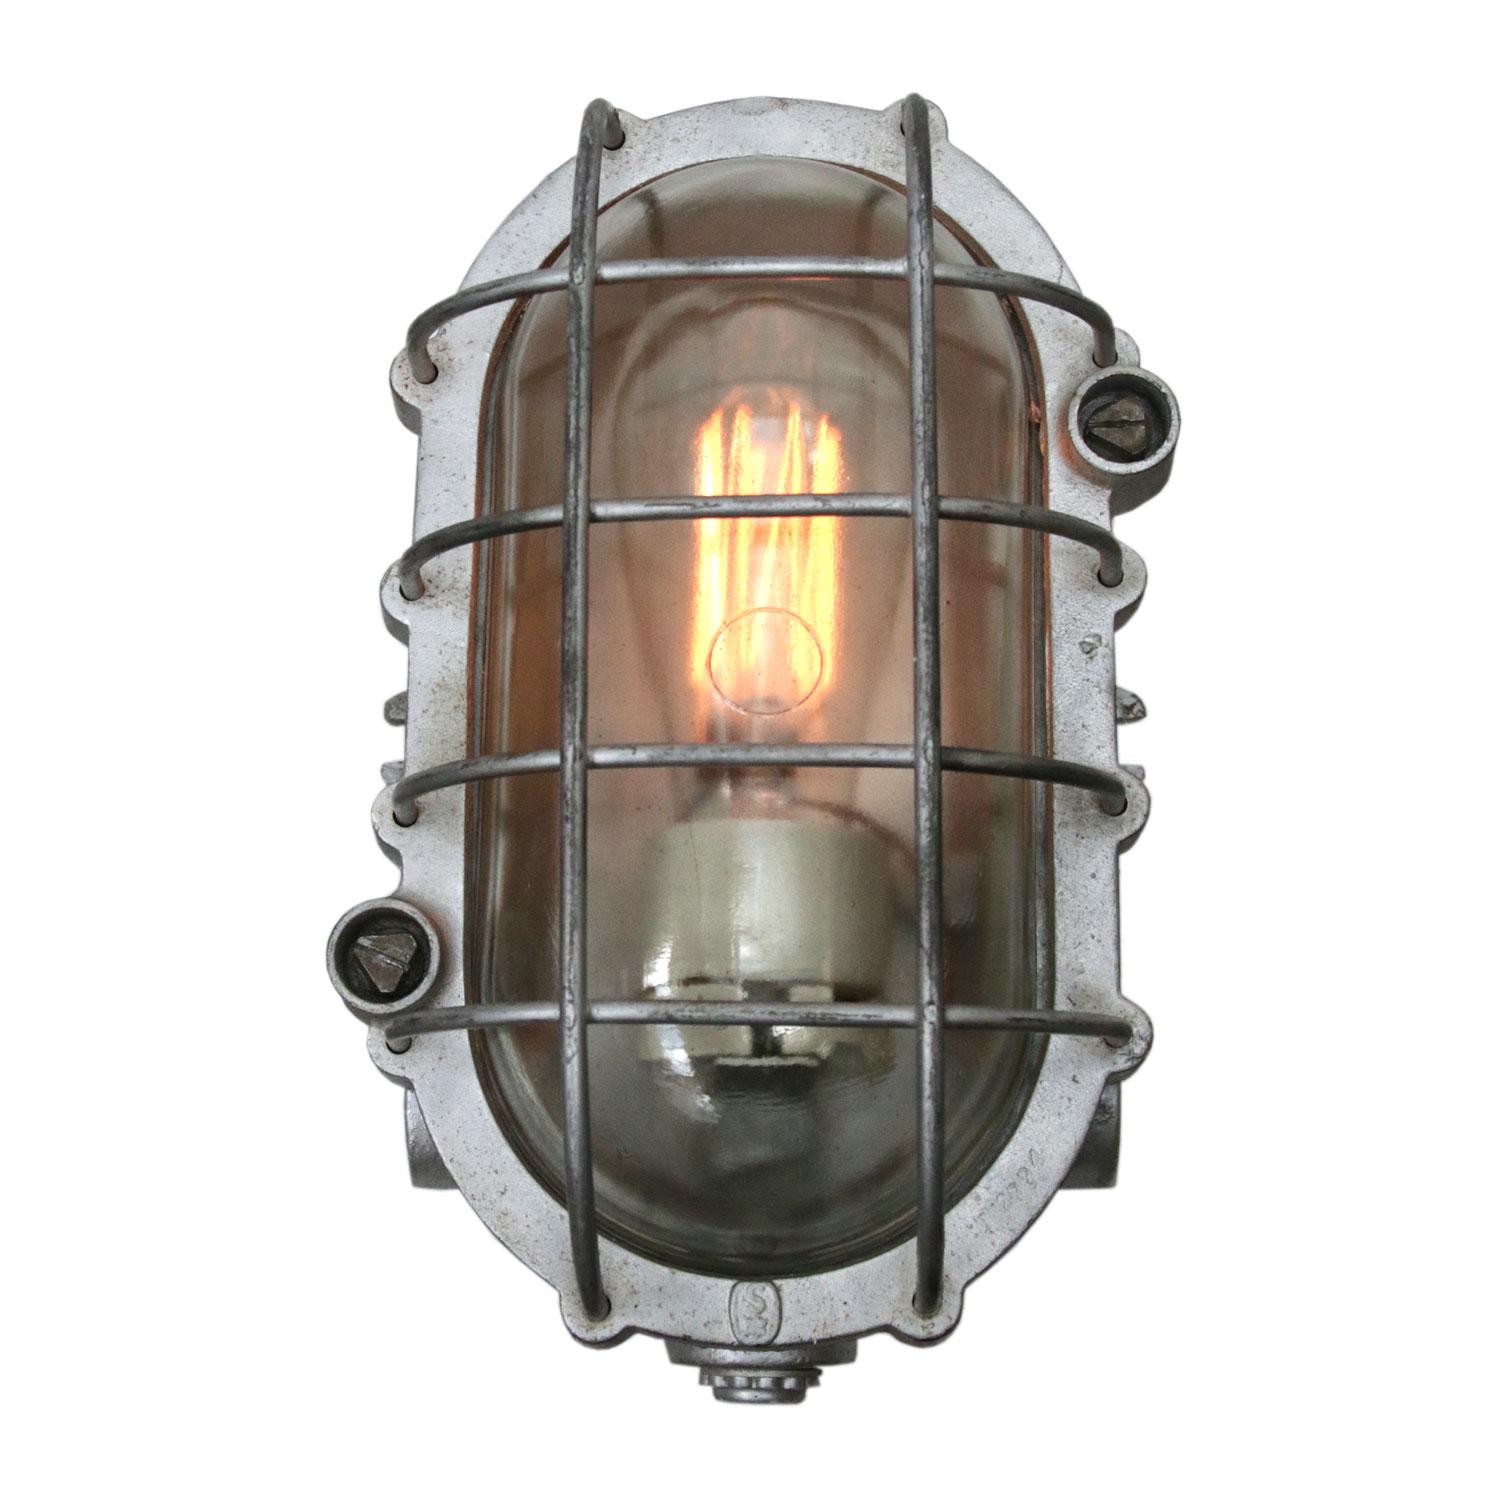 Industrial wall or ceiling lamp
cast aluminium, clear glass.

For use inside

Weight: 4.61 kg / 10.2 lb

Priced per individual item. All lamps have been made suitable by international standards for incandescent light bulbs, energy-efficient